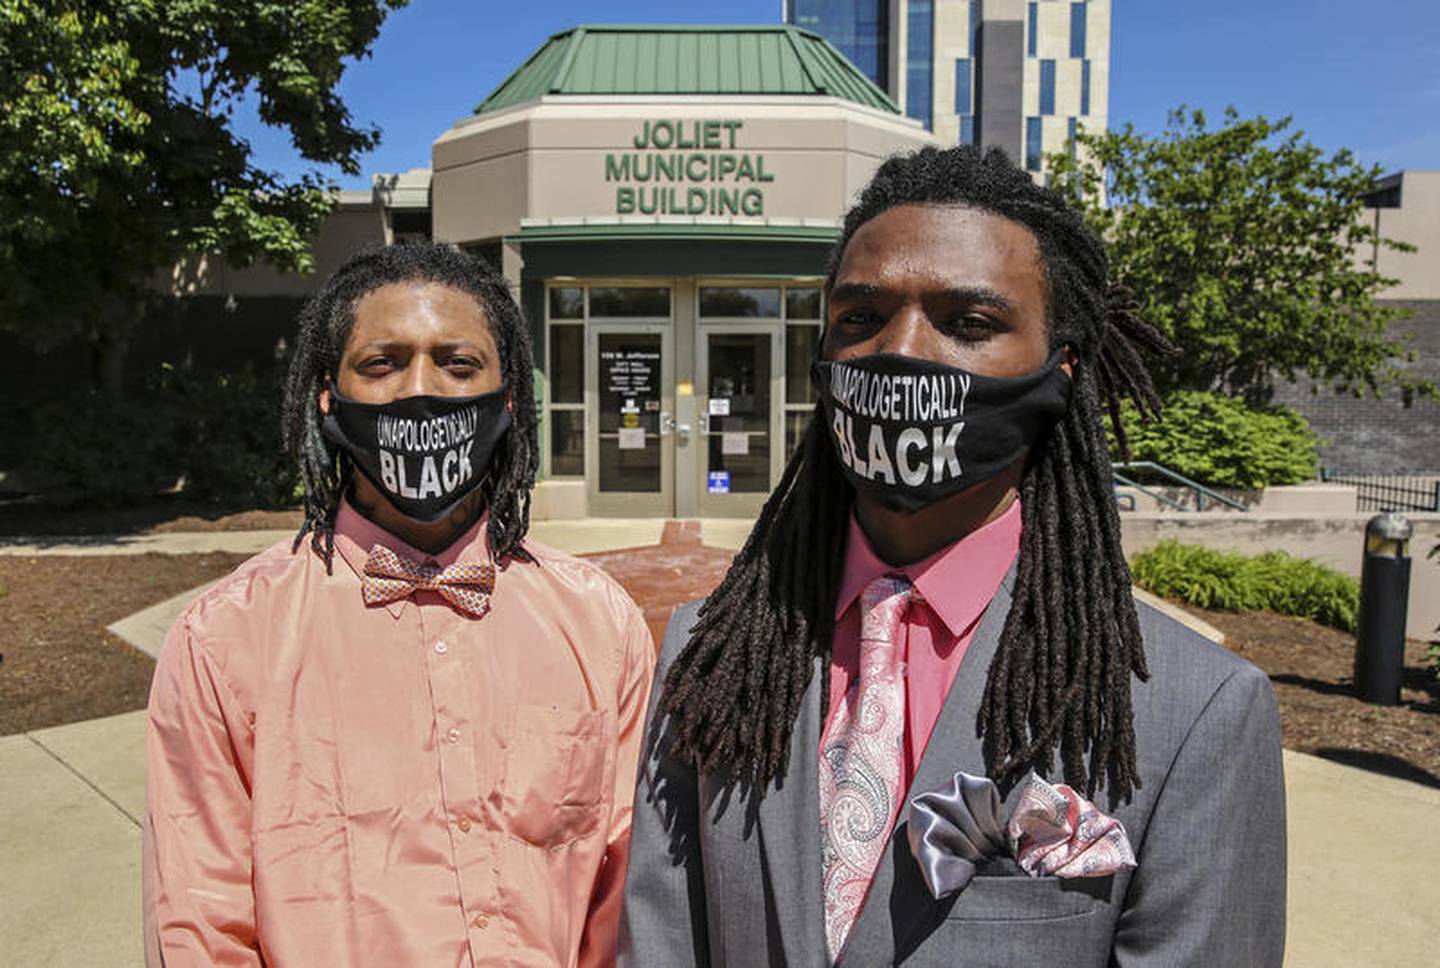 Jamal Smith and Victor Williams pose for a portrait Monday, Jun. 8, 2020, in front of city hall in Joliet, Ill.